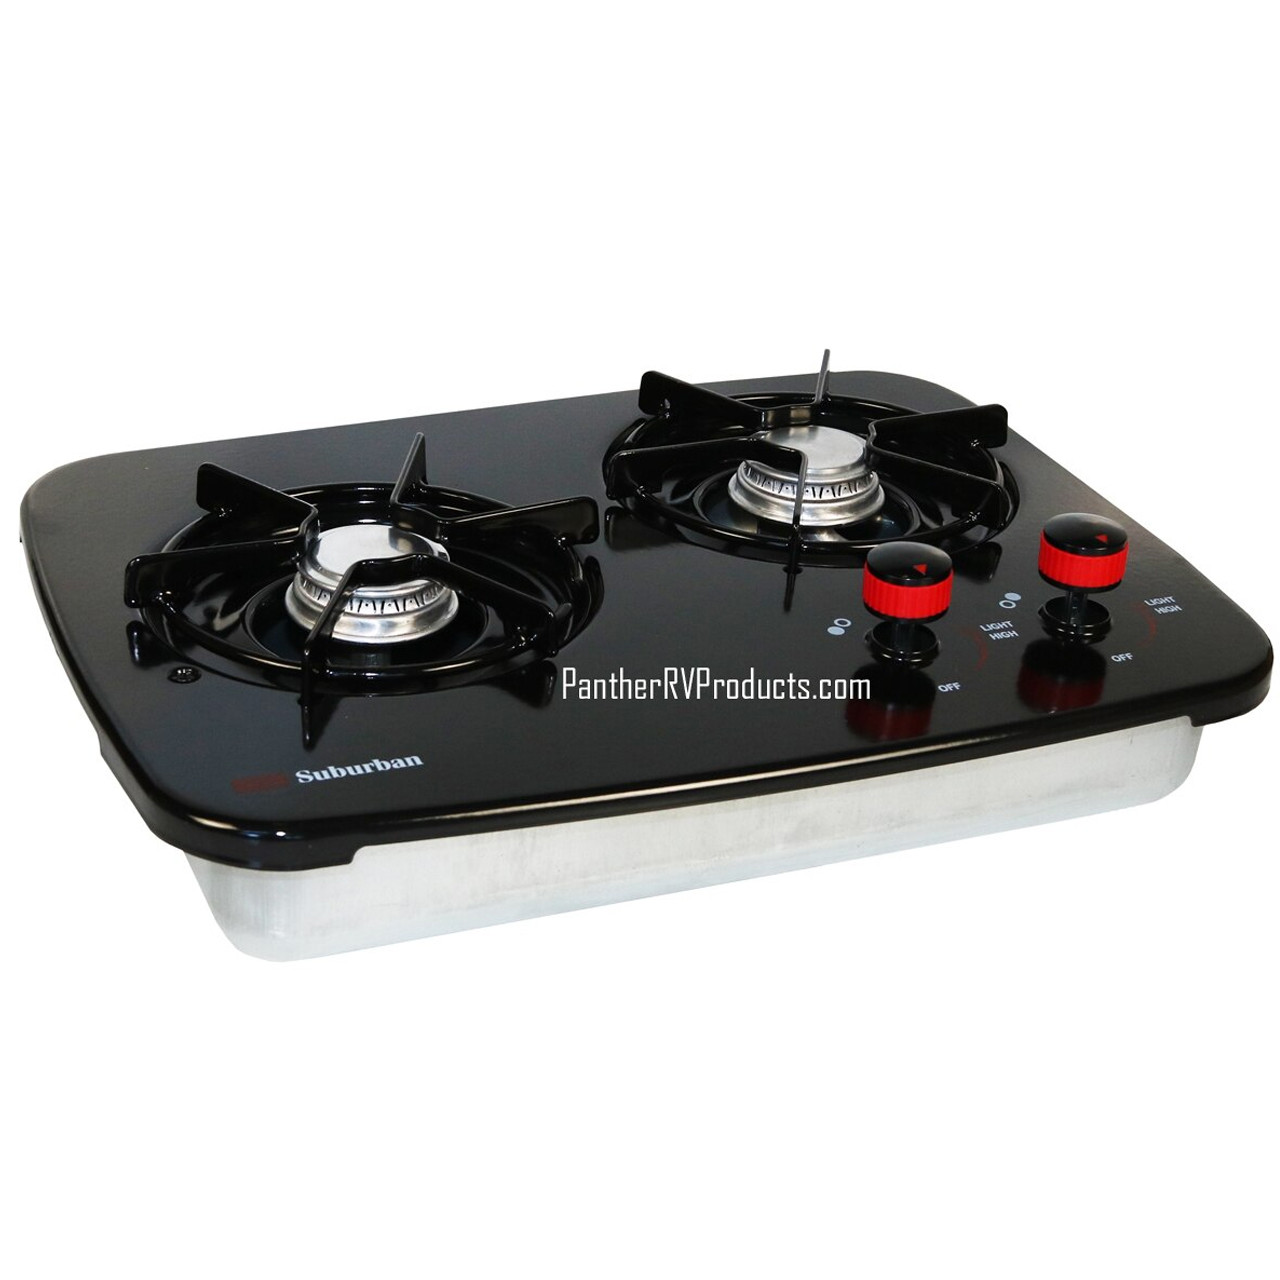 Atwood | Dometic Black RV Drop-In Cook Top D21-BPW